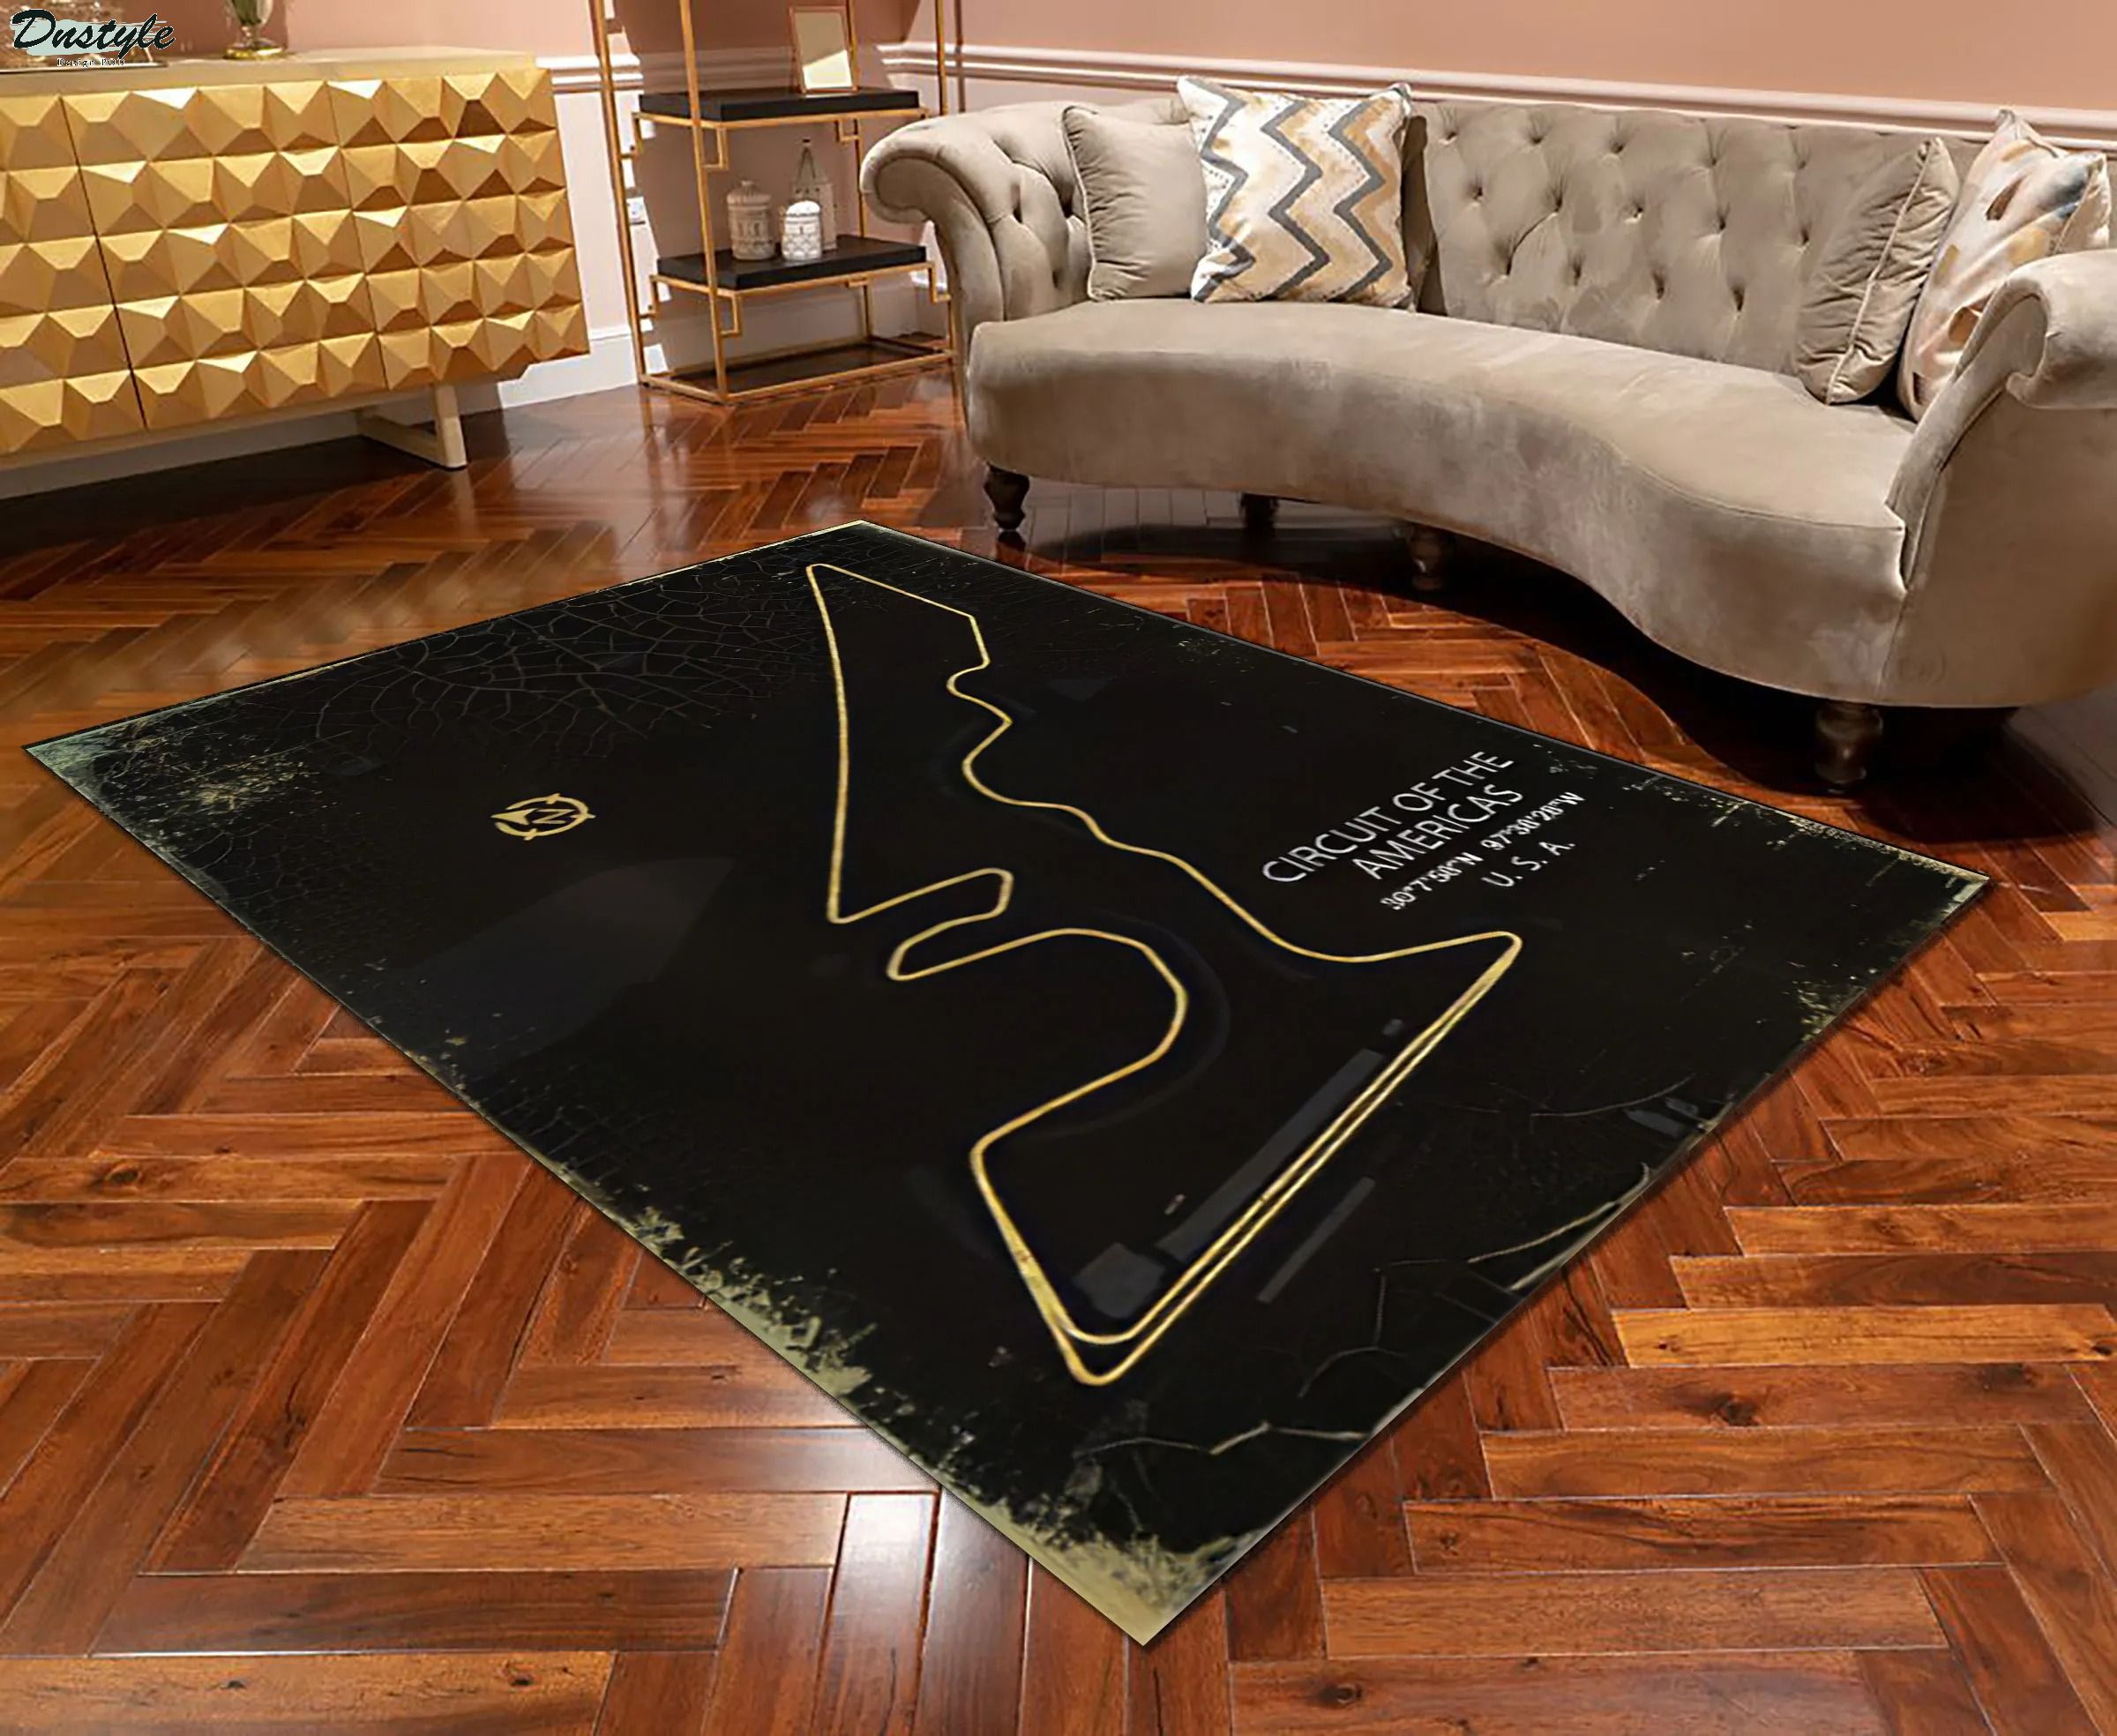 Circuit of the americas F1 track rug 1